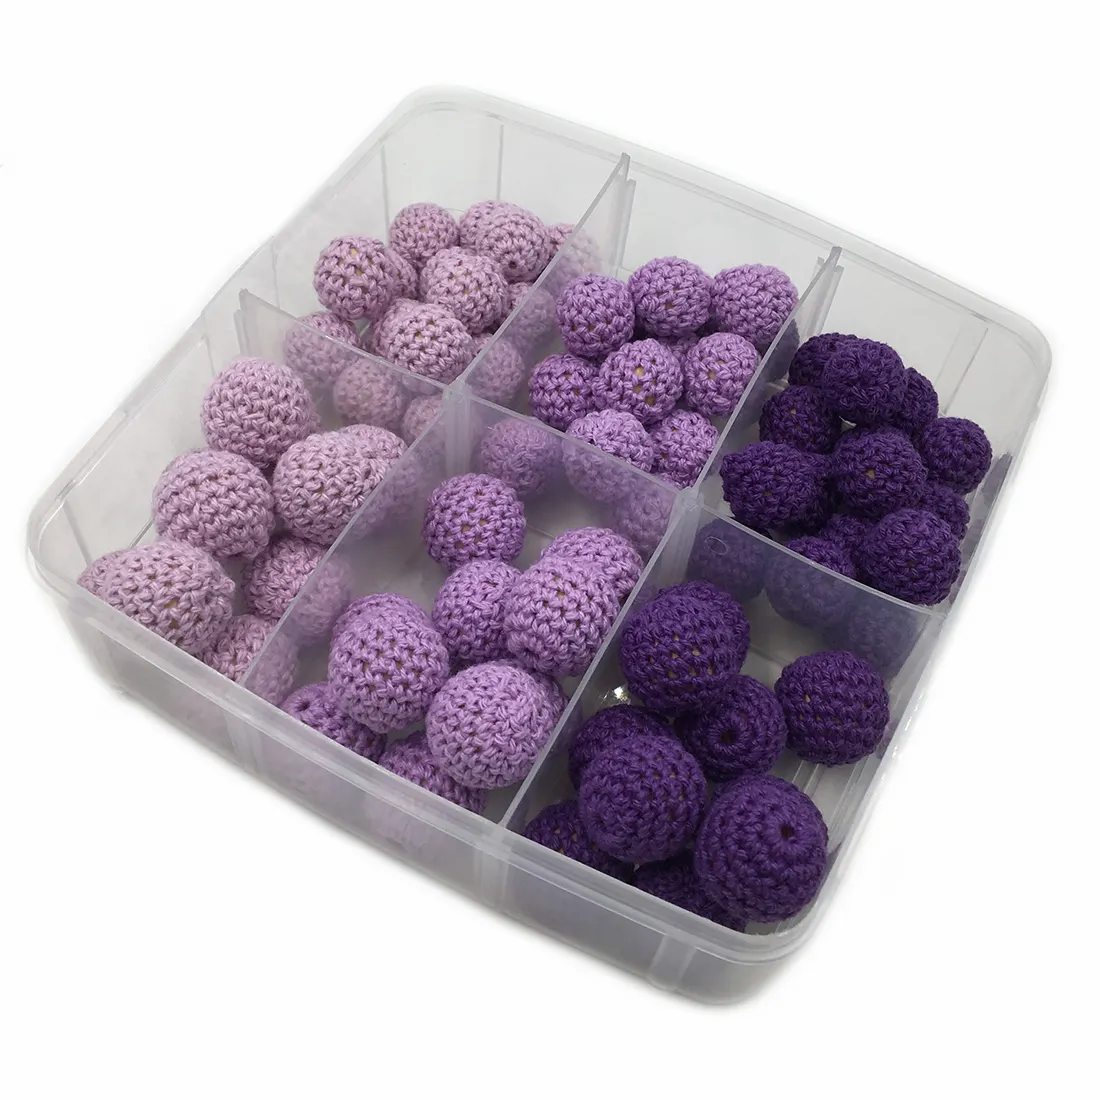 Purple Series Crochet Beads Available For Knitted By Cotton Thread DIY Baby Teether Jewellery Making Kit